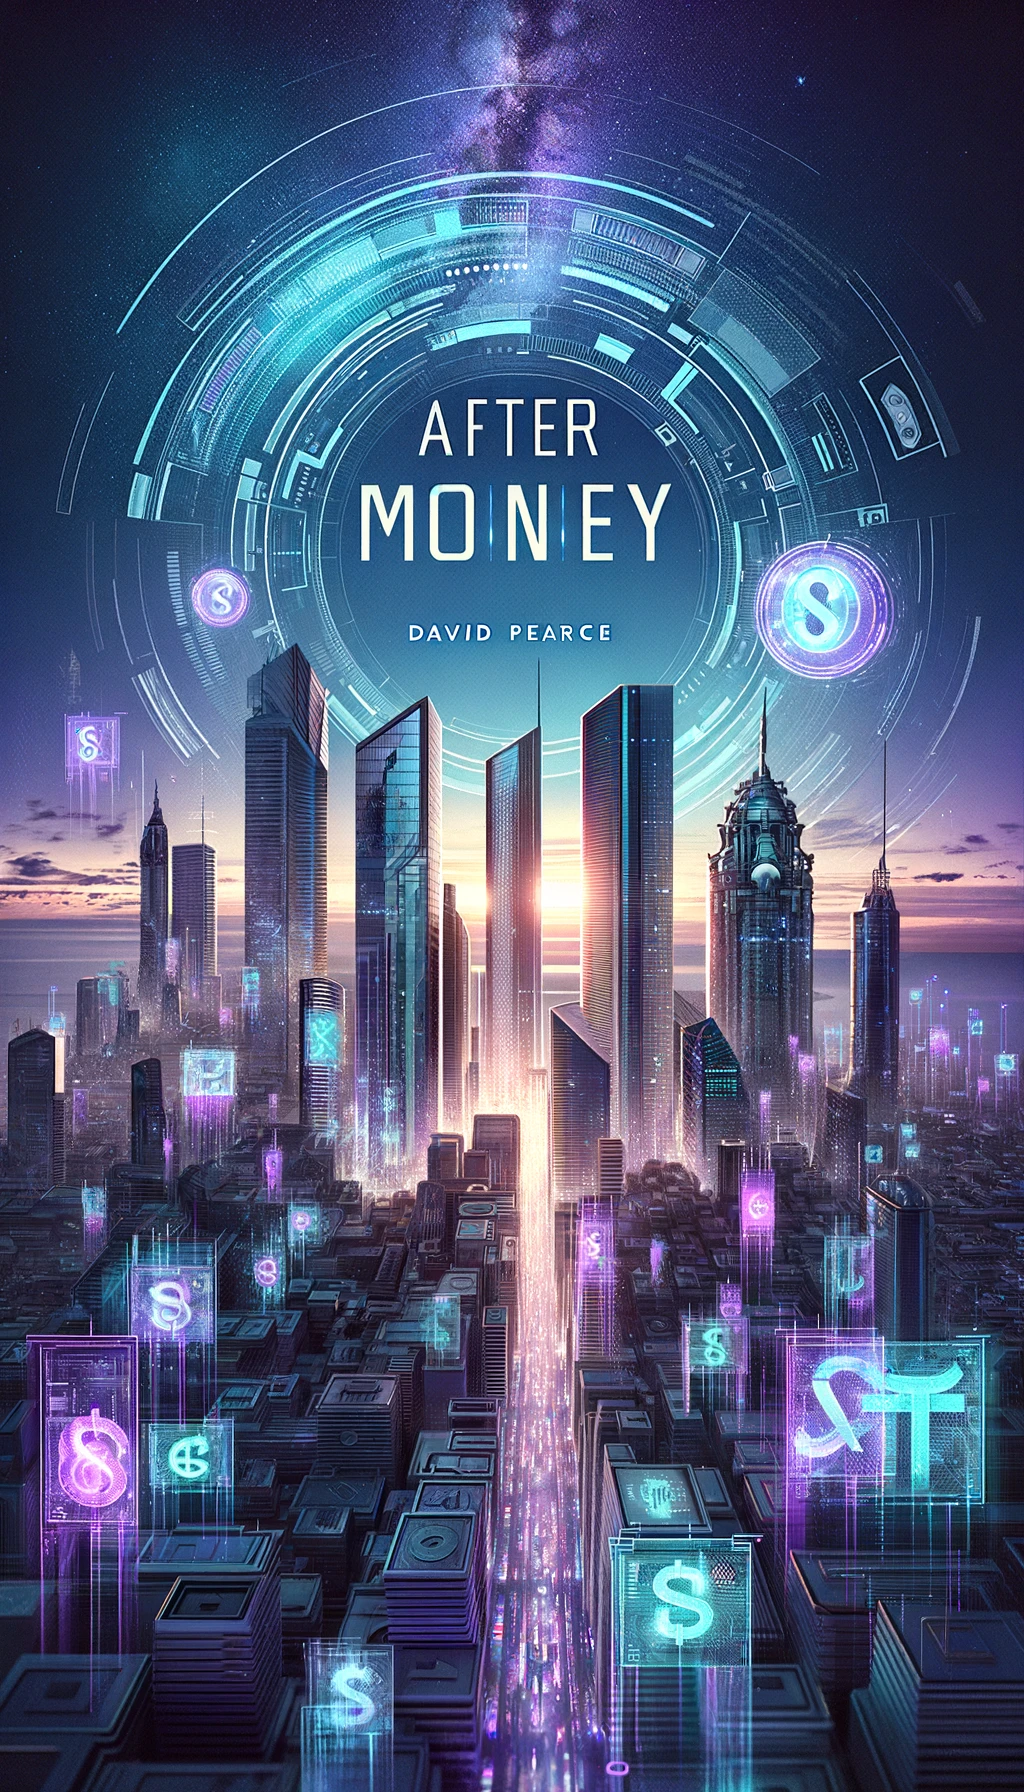 After Money by David Pearce